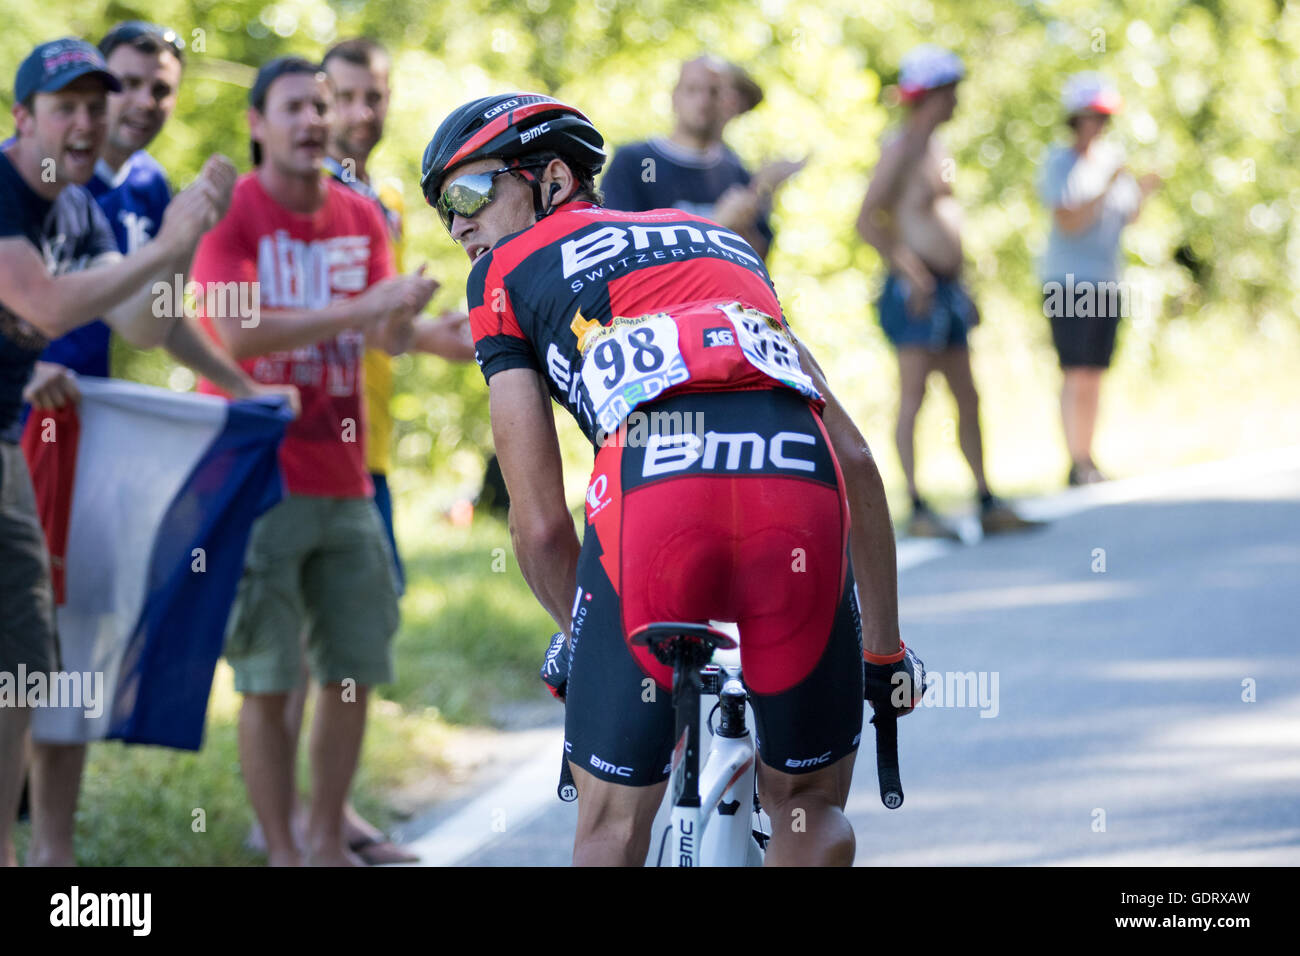 Finhaut, Switzerland. 20th July, 2016. 20th July, 2016. After dropping from the breakaway group, Greg Van Avermaet (BMC Racing Team) looks back, waiting to assist team leader Richie Porte up the climb to the Emosson dam. Credit:  John Kavouris/Alamy Live News Stock Photo